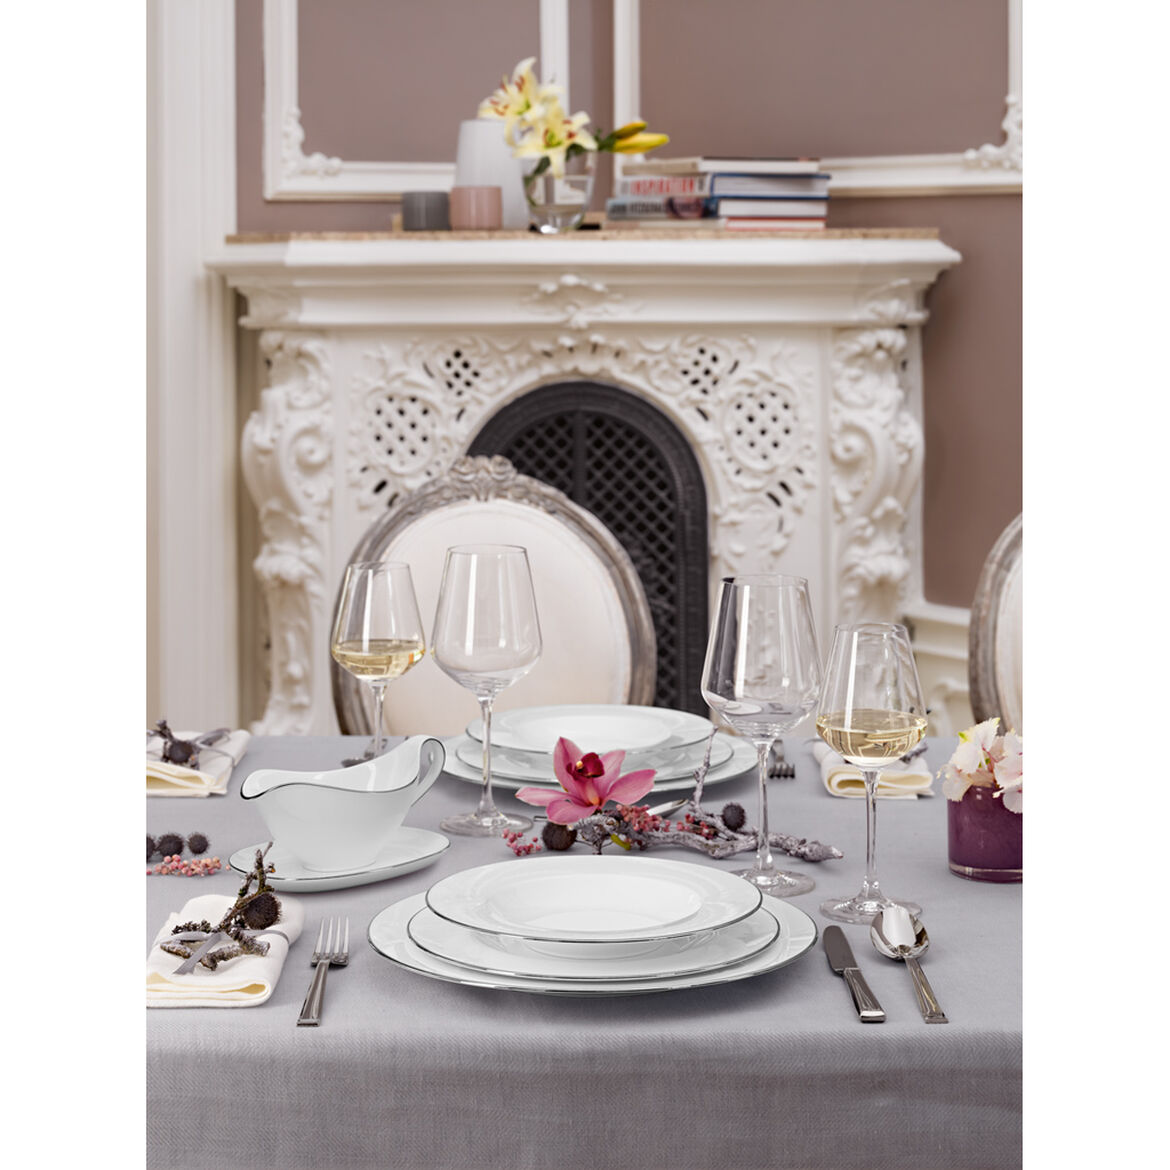 Villeroy & Boch Anmut Platinum No. 1 5-Piece Place Setting - image 1 of 1